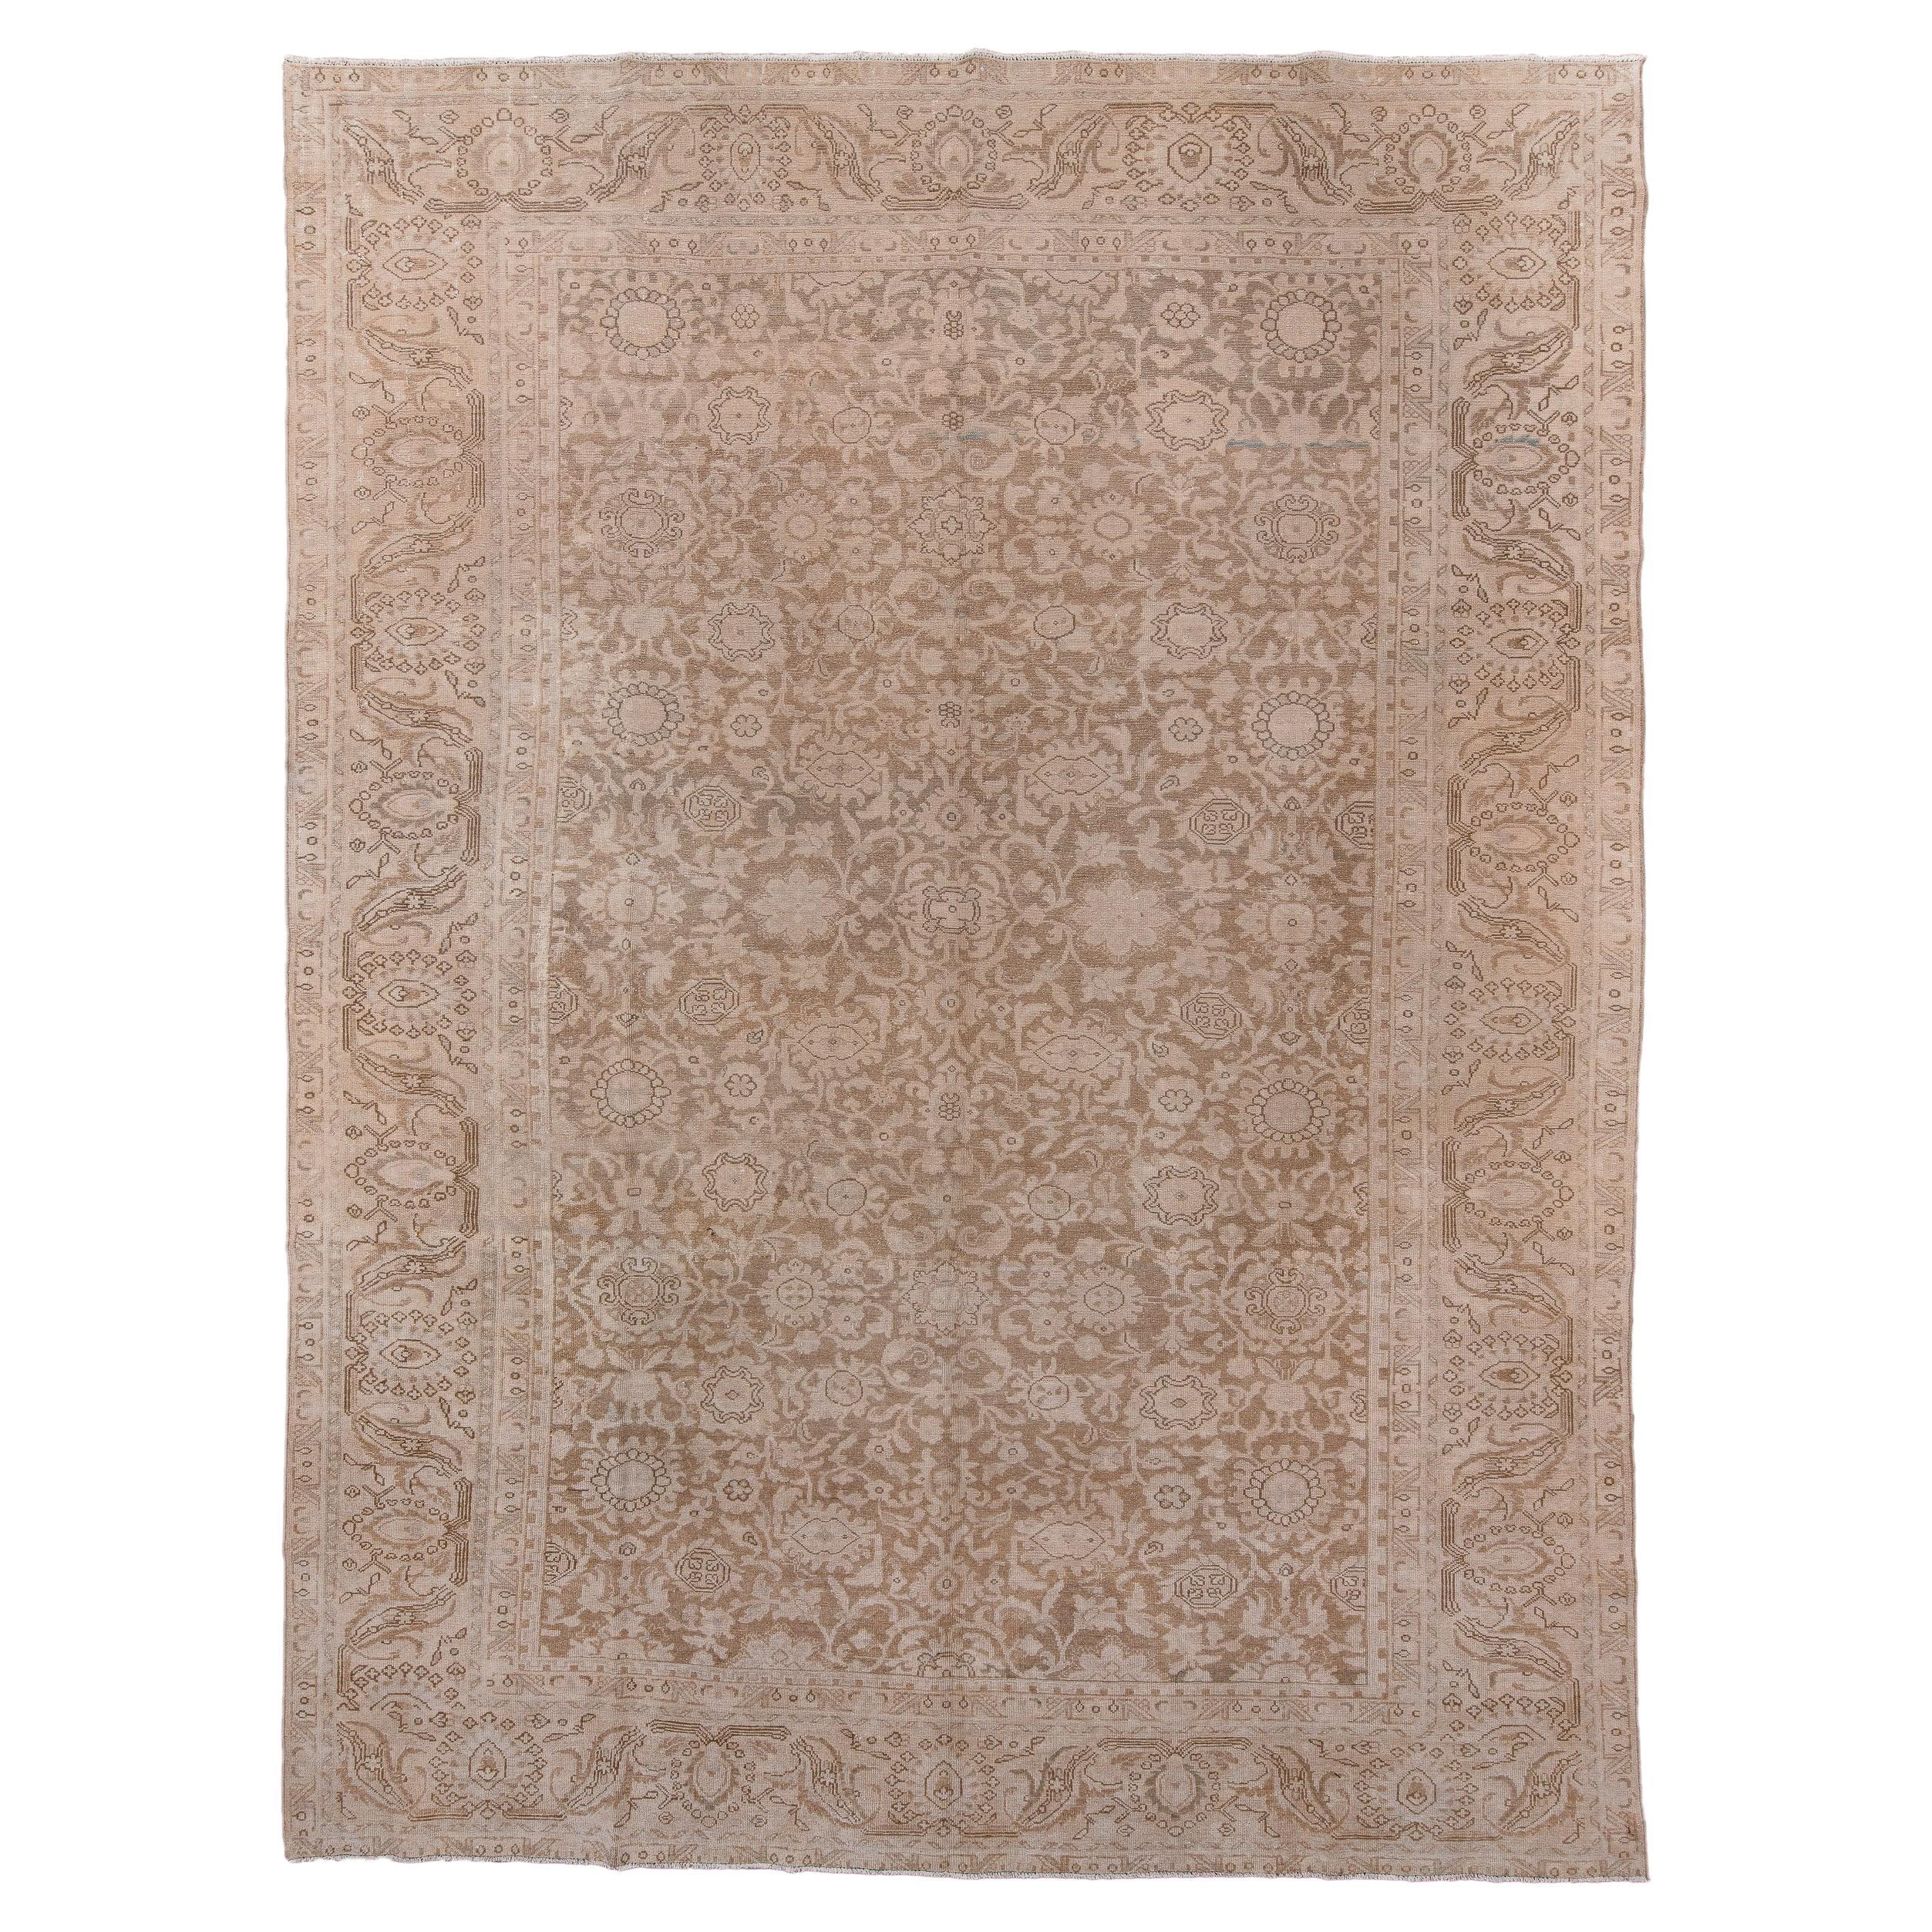 Antique Malayer Rug with Soft Simple Palette